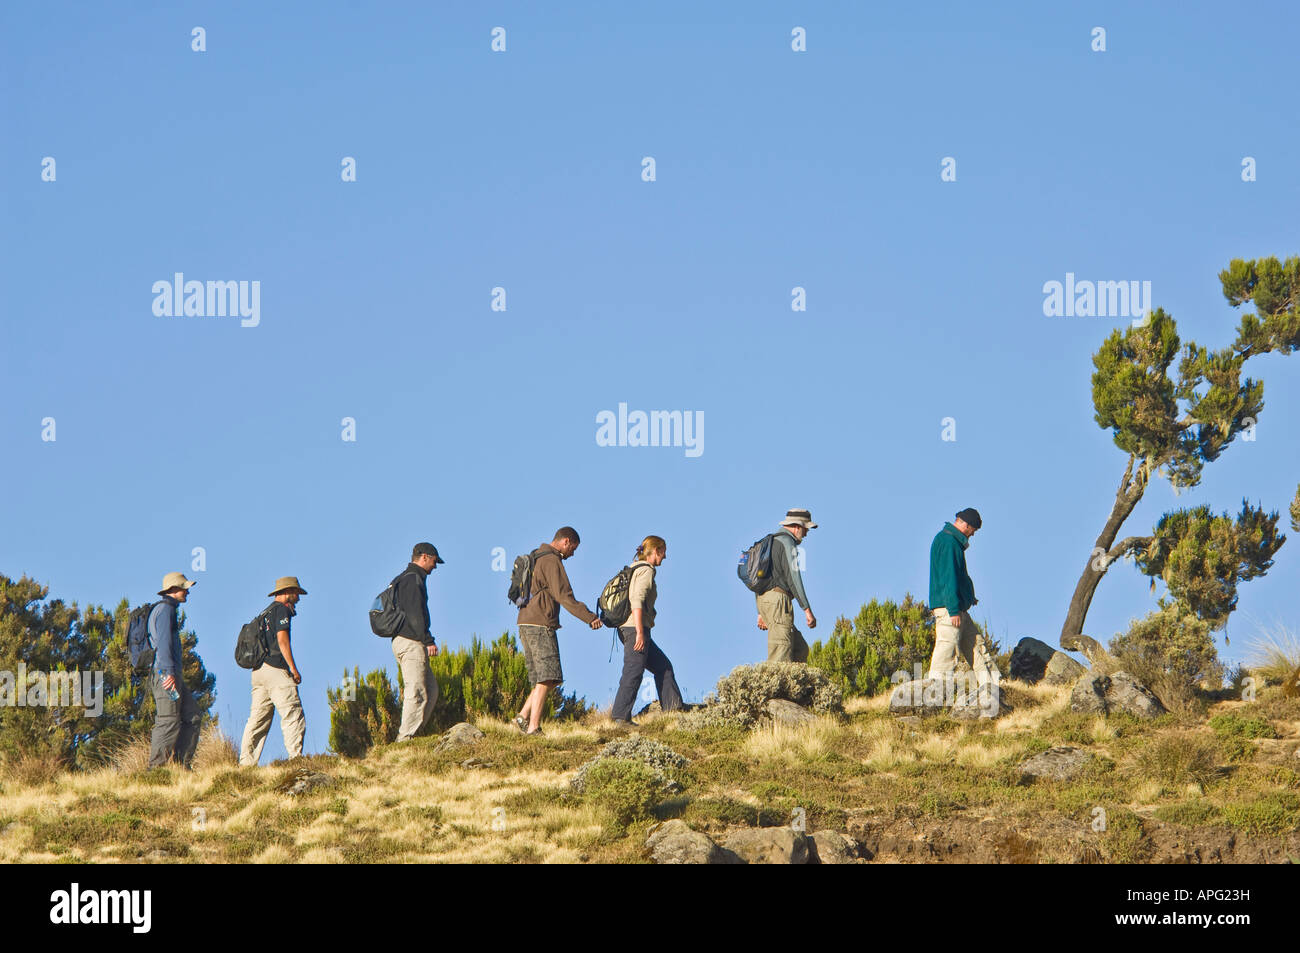 A group of tourists trekking hiking through the Semien Mountain National Park. Stock Photo